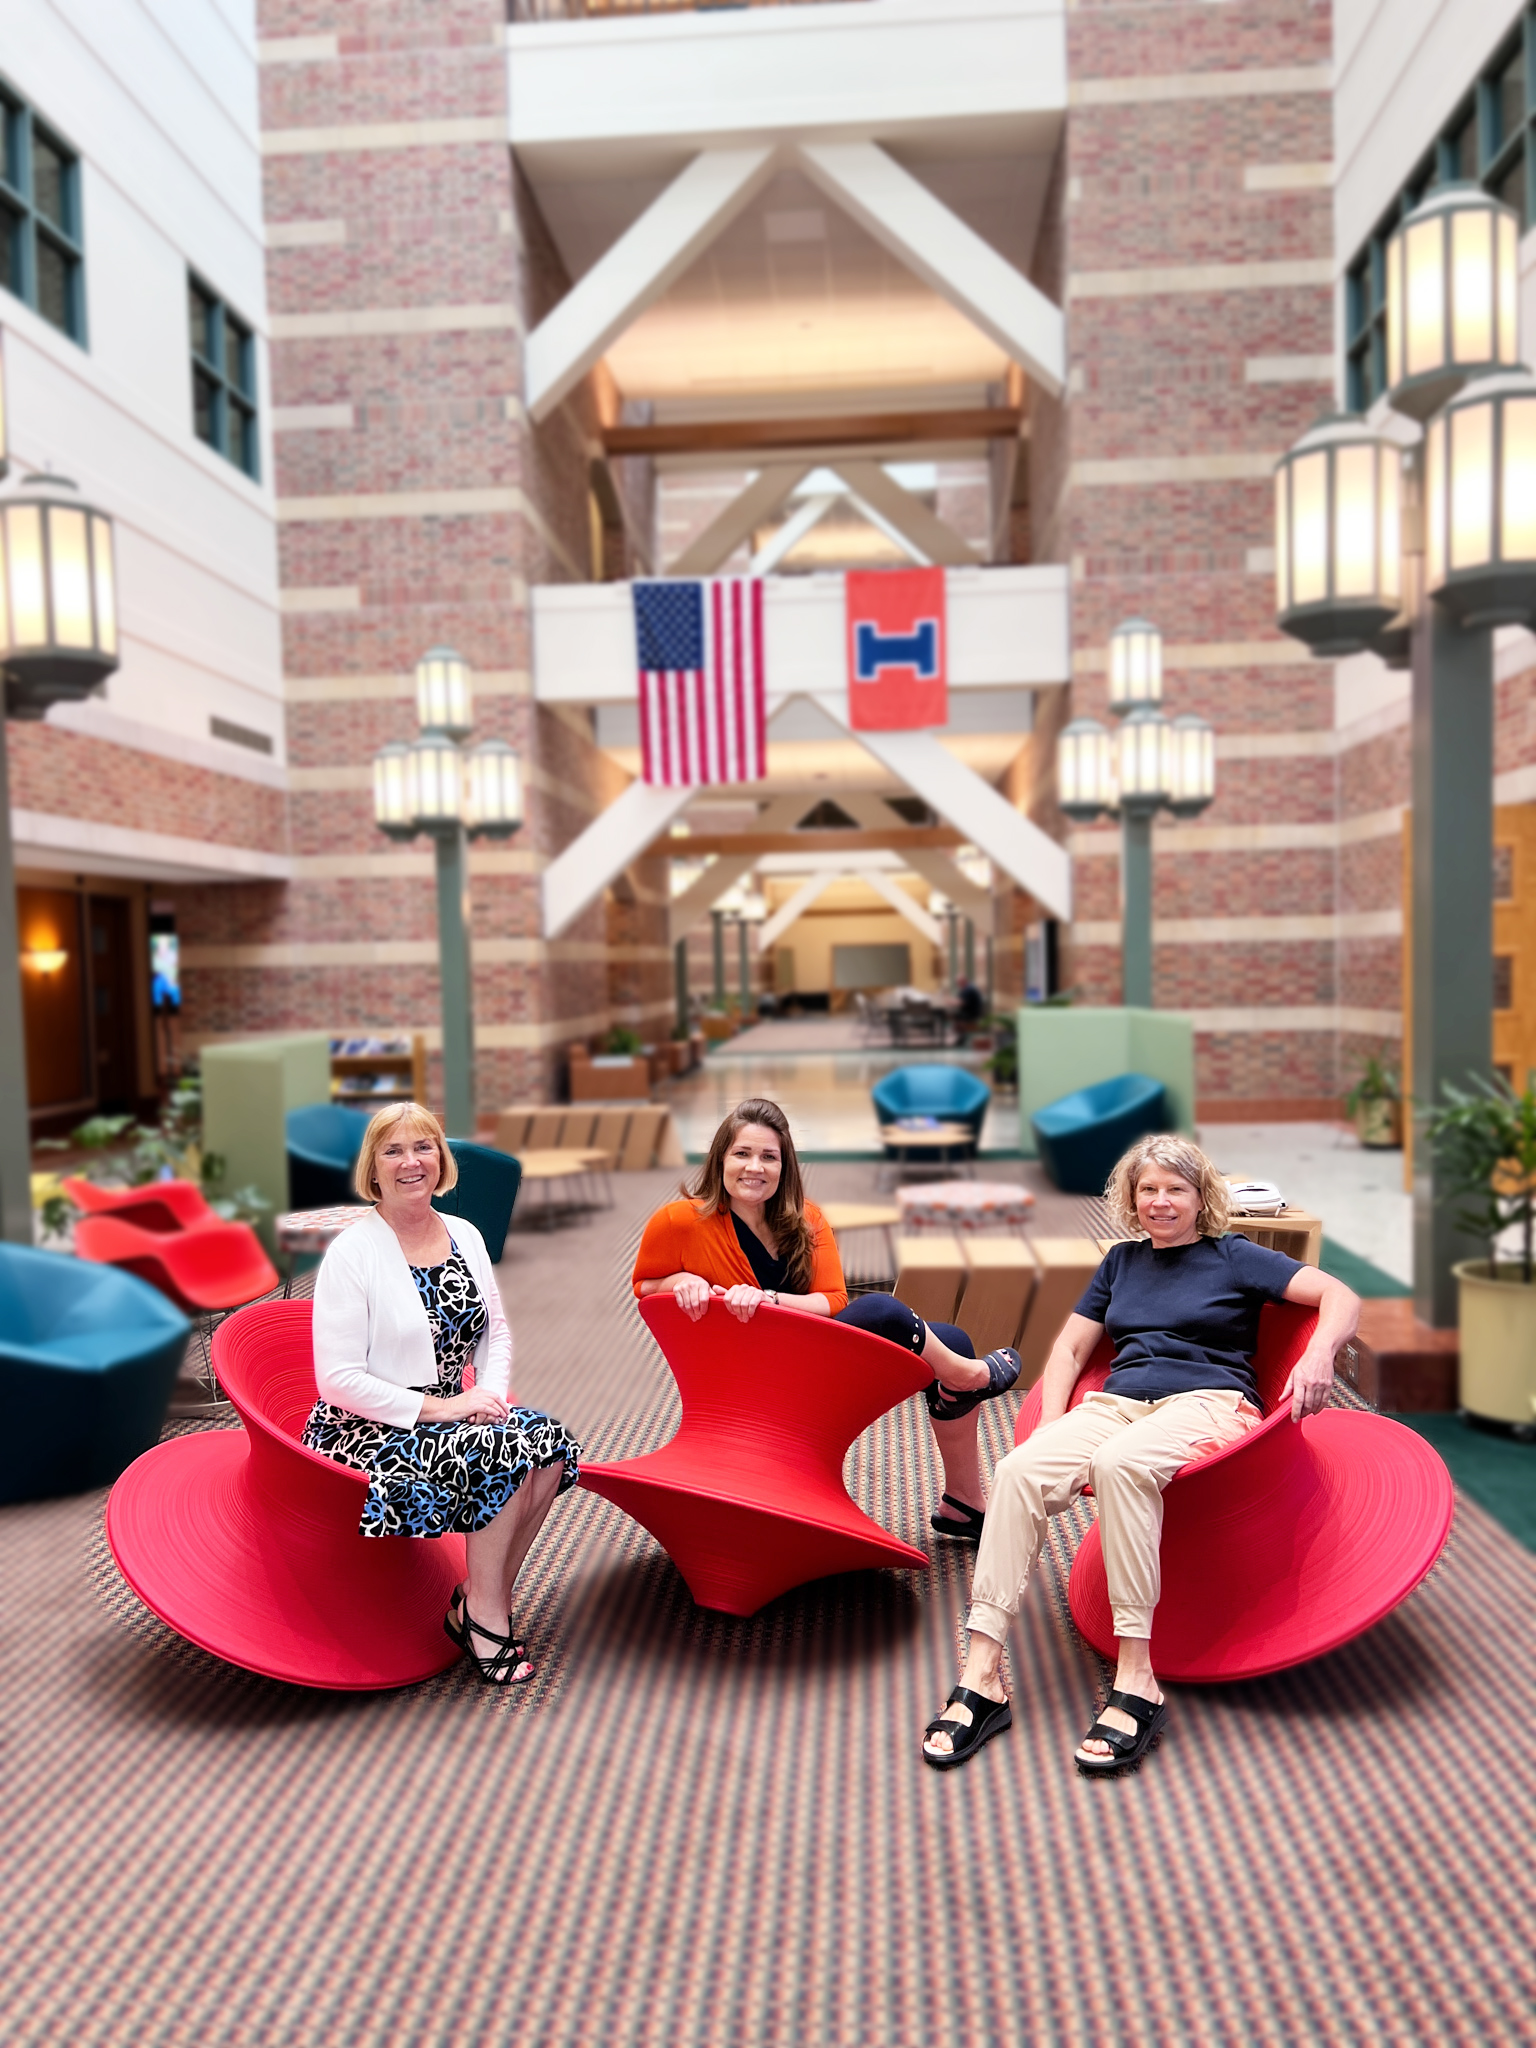 Wszalek, Hetrick and Ceman in the Beckman Institute East Atrium. Credit: Lindy Carlisle, Beckman Institute Communications Office.